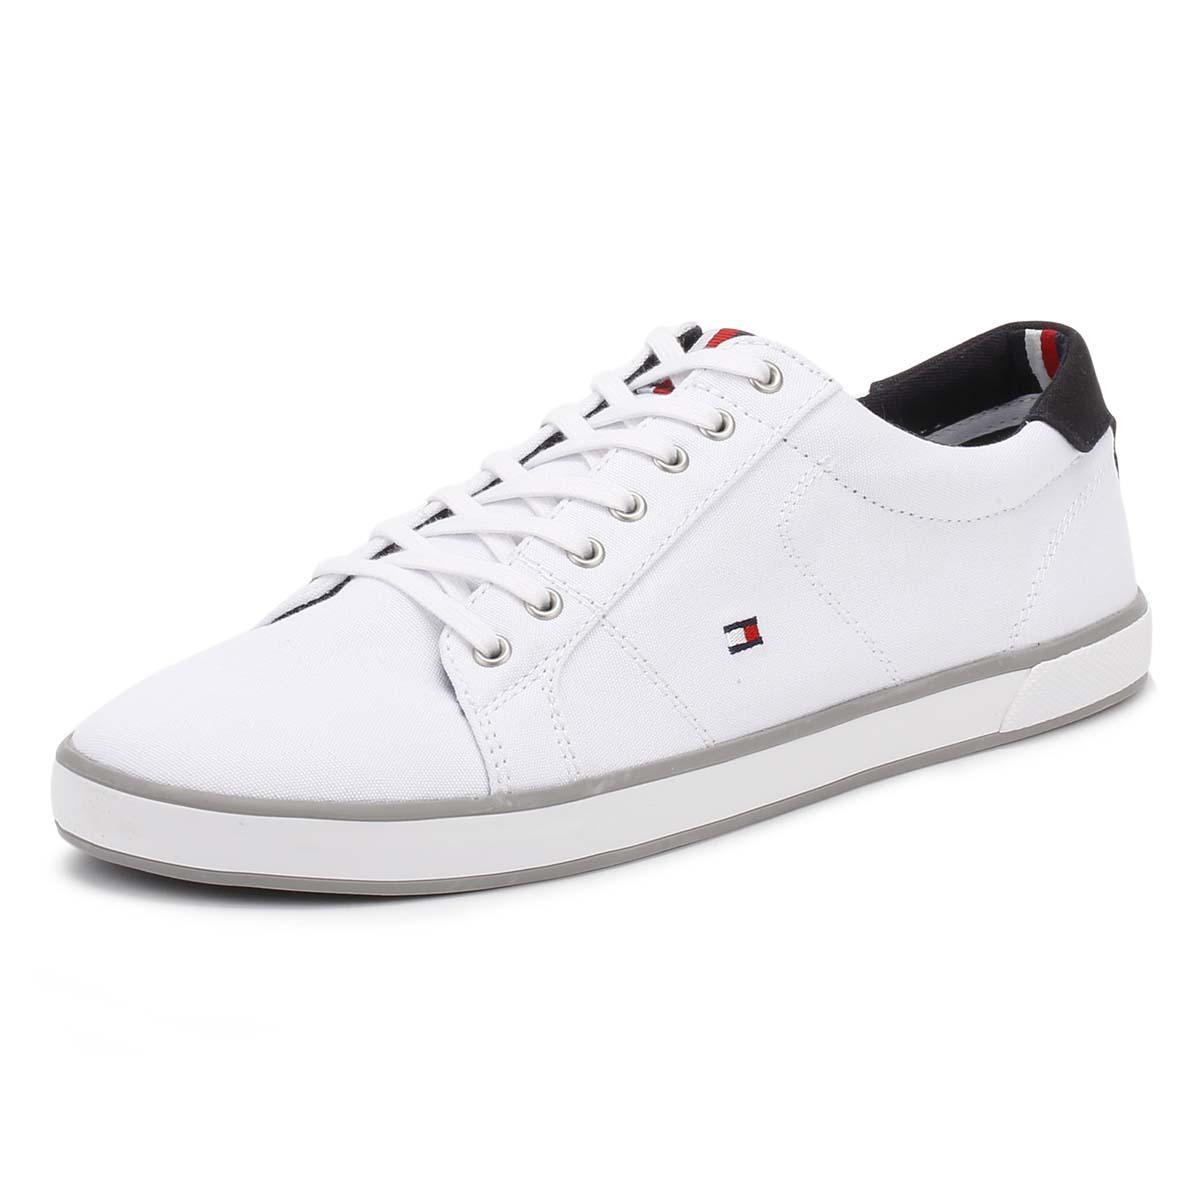 Tommy Hilfiger White Harlow Canvas Sneakers in White for Men - Lyst